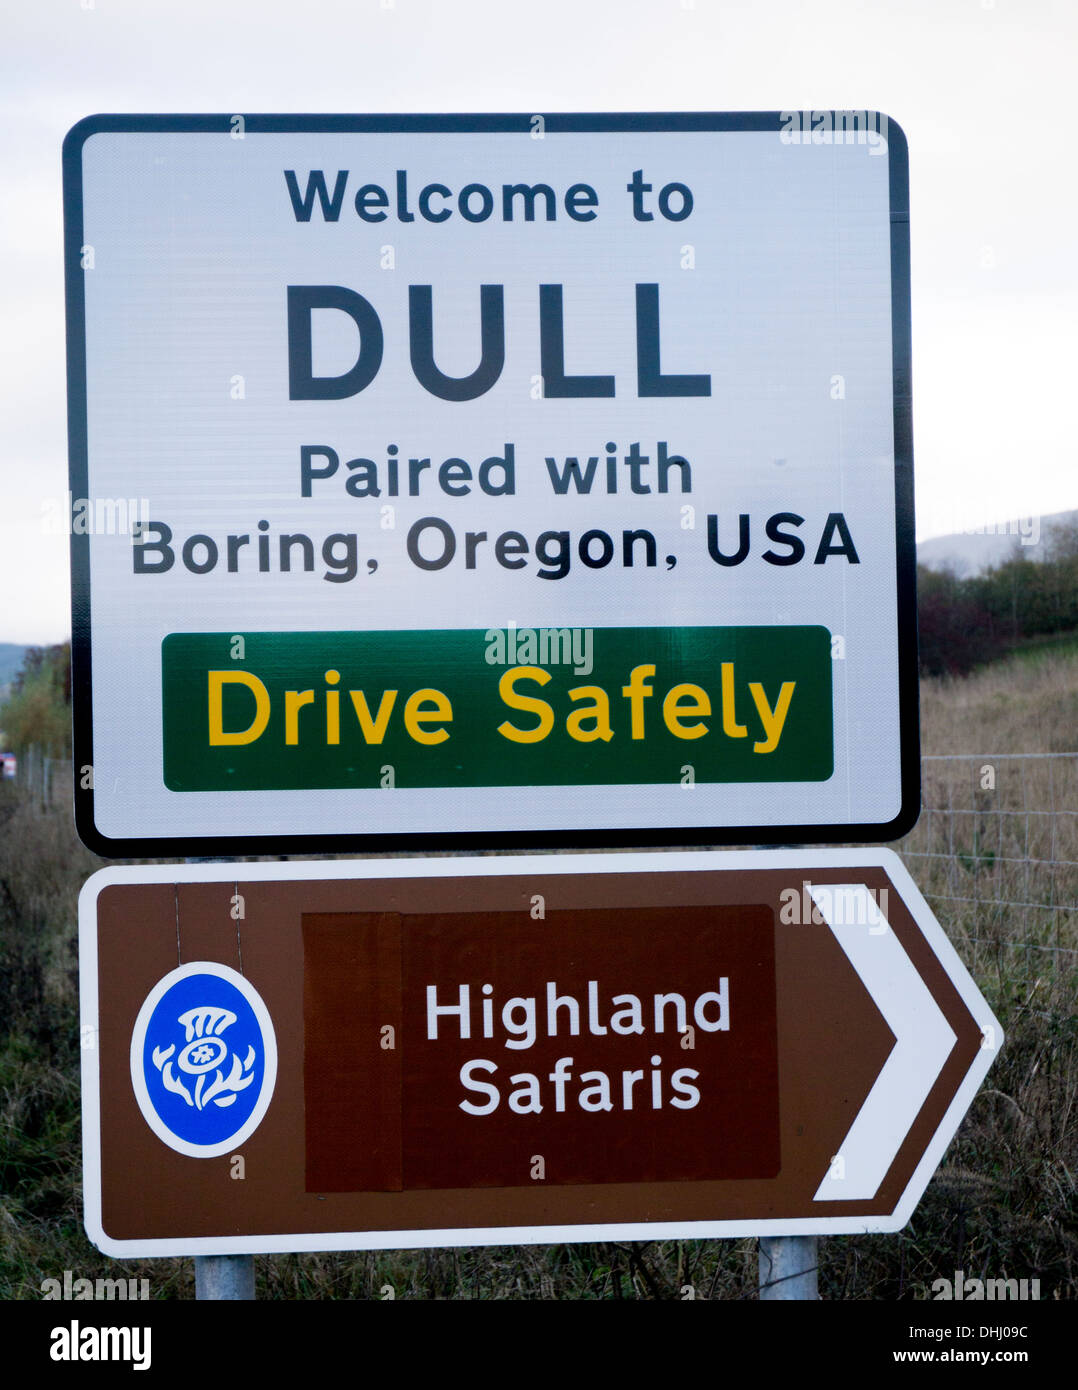 Image result for Dull sign